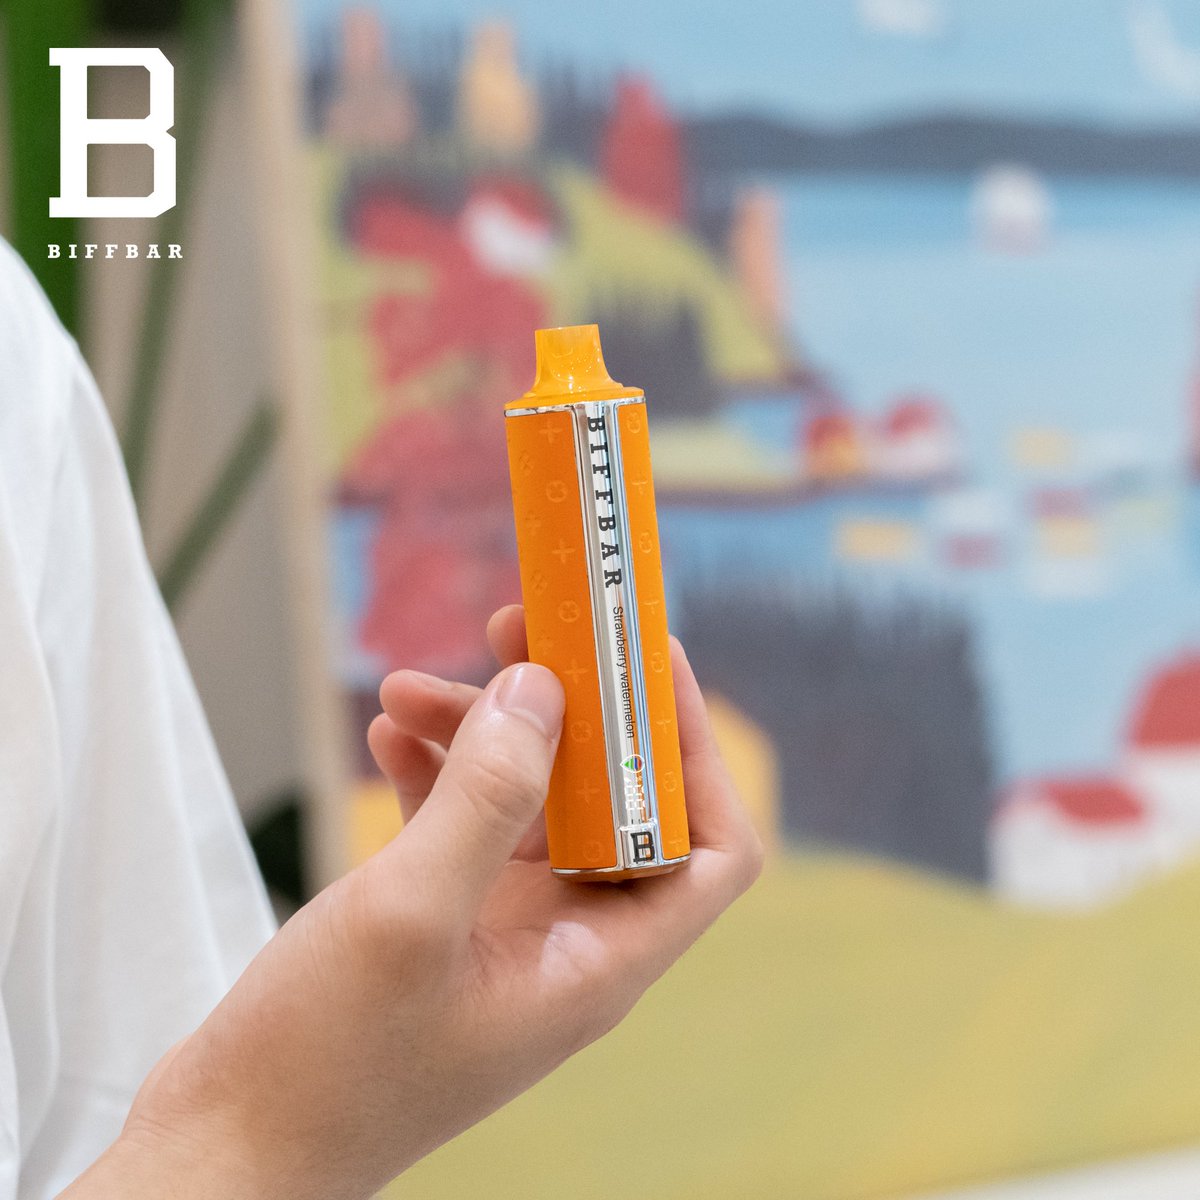 Always on the go with my Biffbar King!

The sleek leather and silver design gives off major luxury vibes. 🤩 Plus, the digital display lets me know when it's time to charge.

#biffbar #biffbarking #lifestyle #vapepen #vapelyfe #fashion #foryoupage